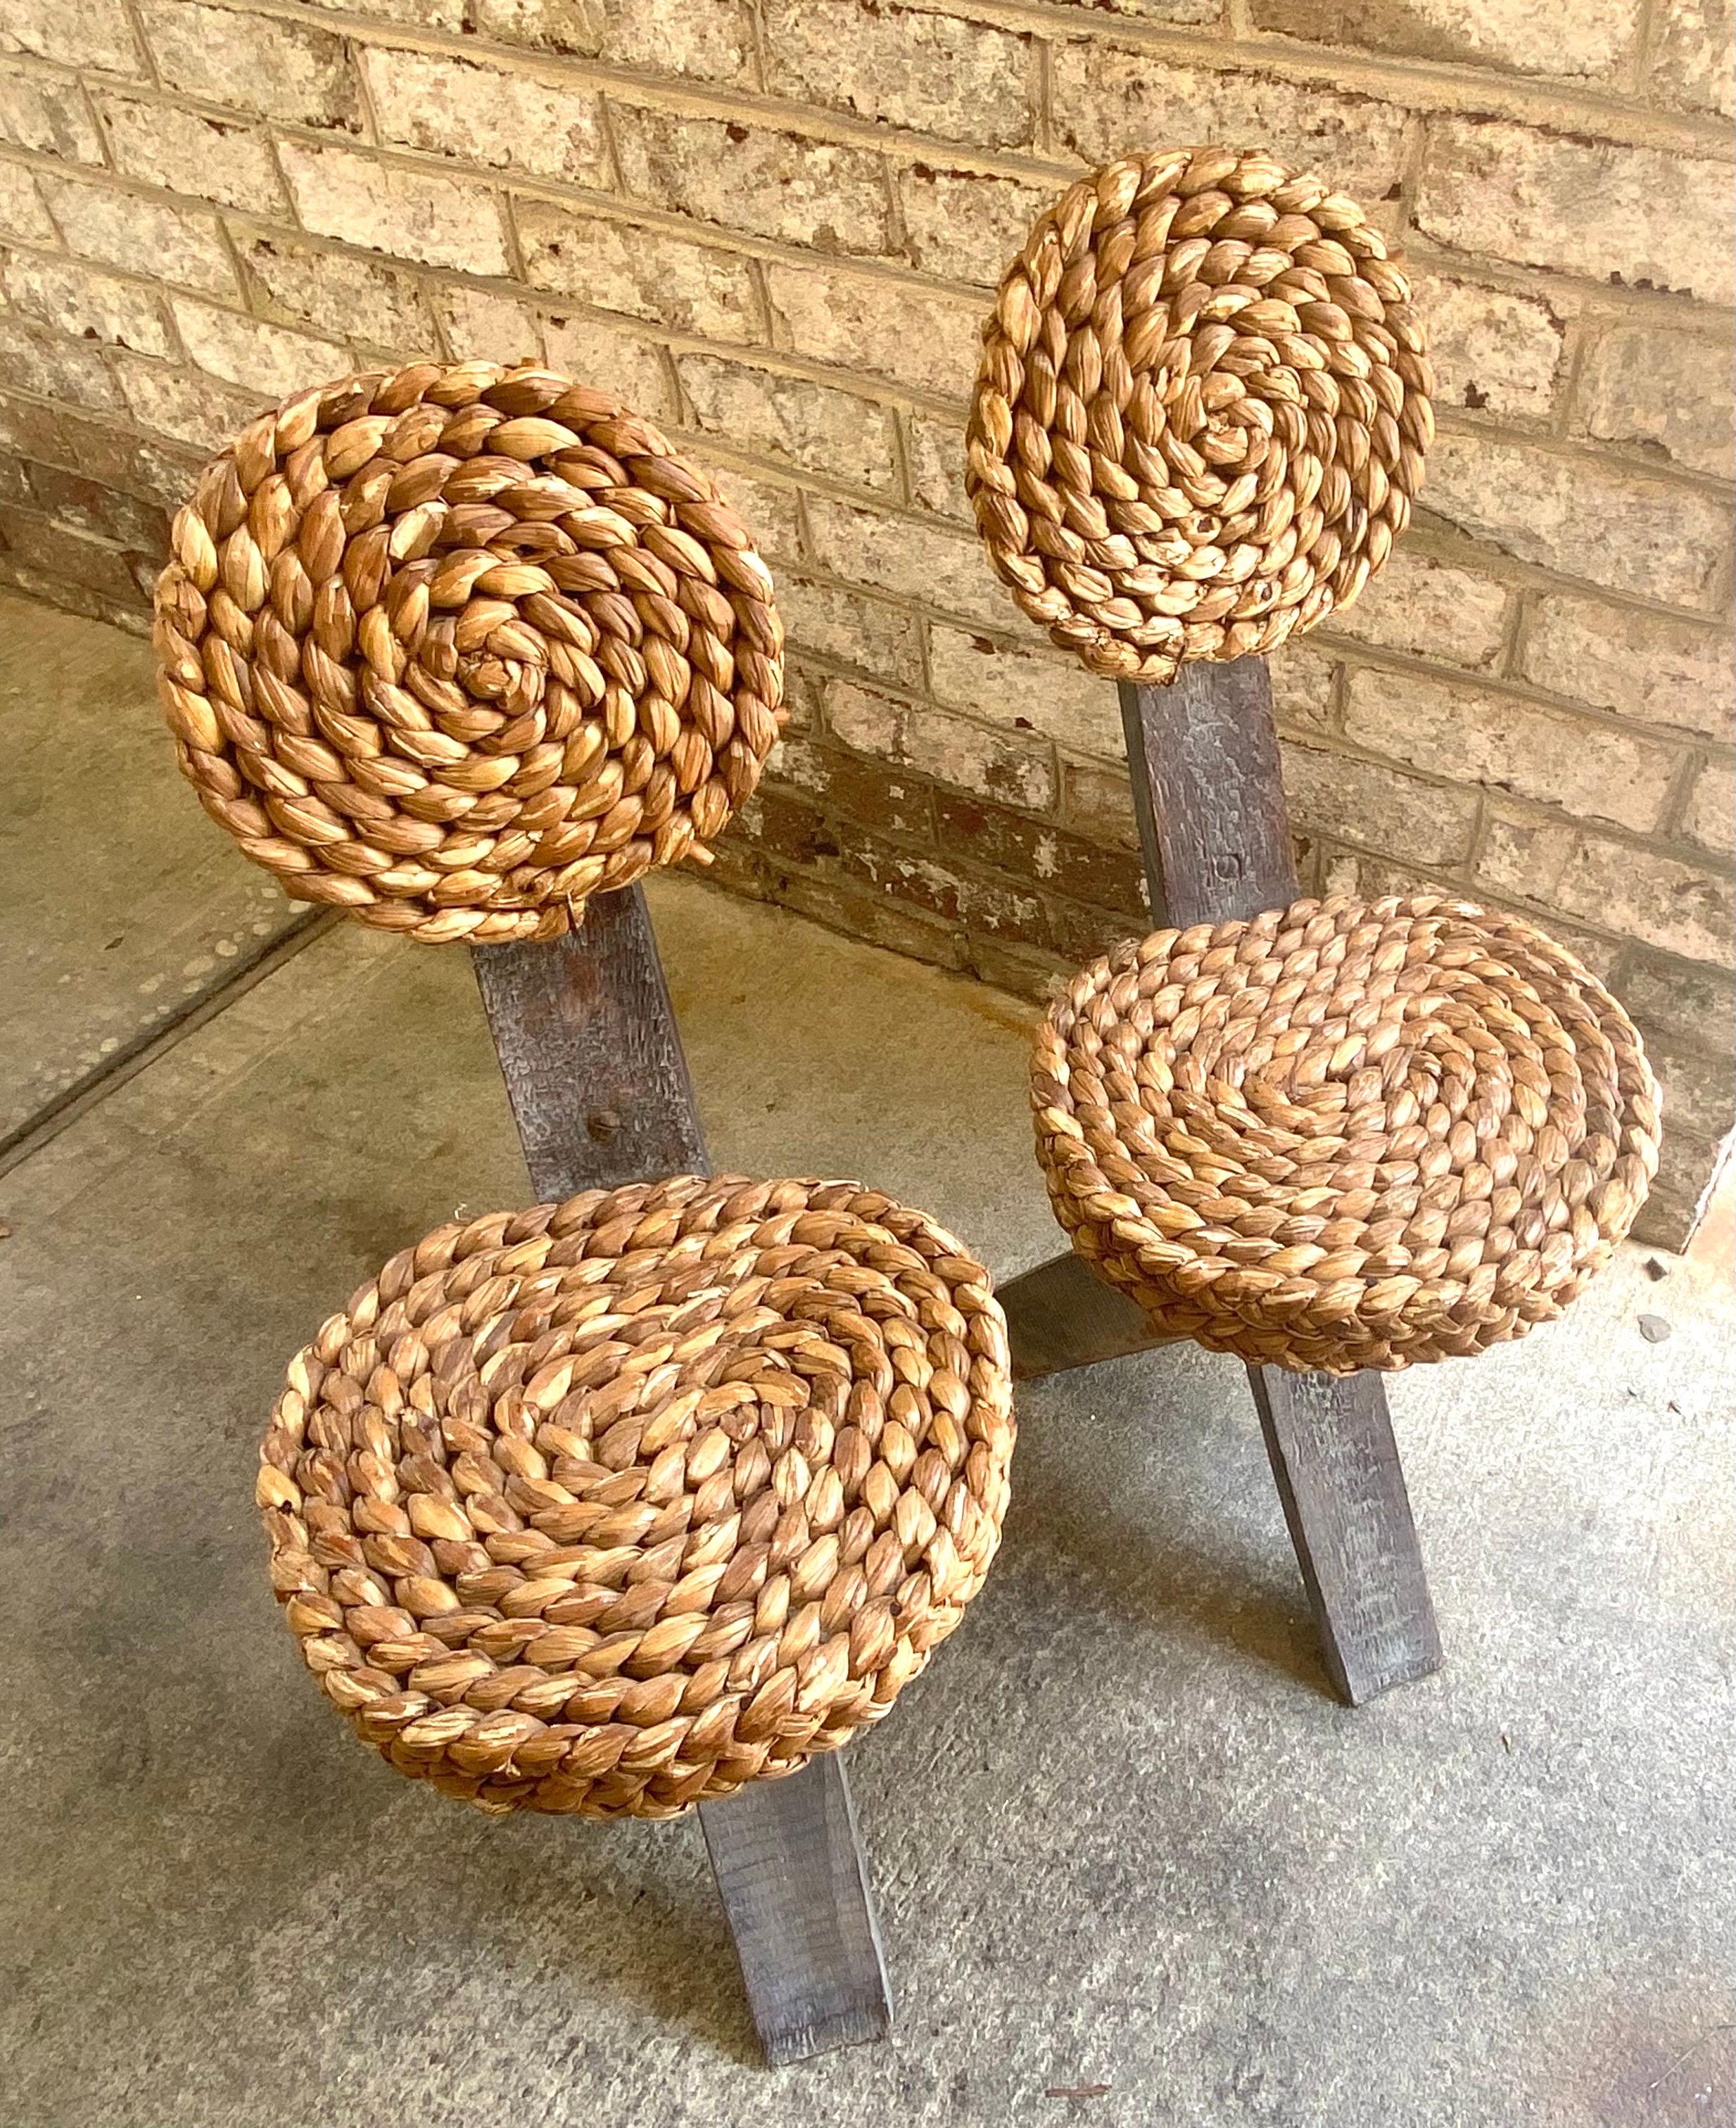 Pair of Audoux Minet Tripod Base Chairs with Abaca Seat and Back For Sale 2